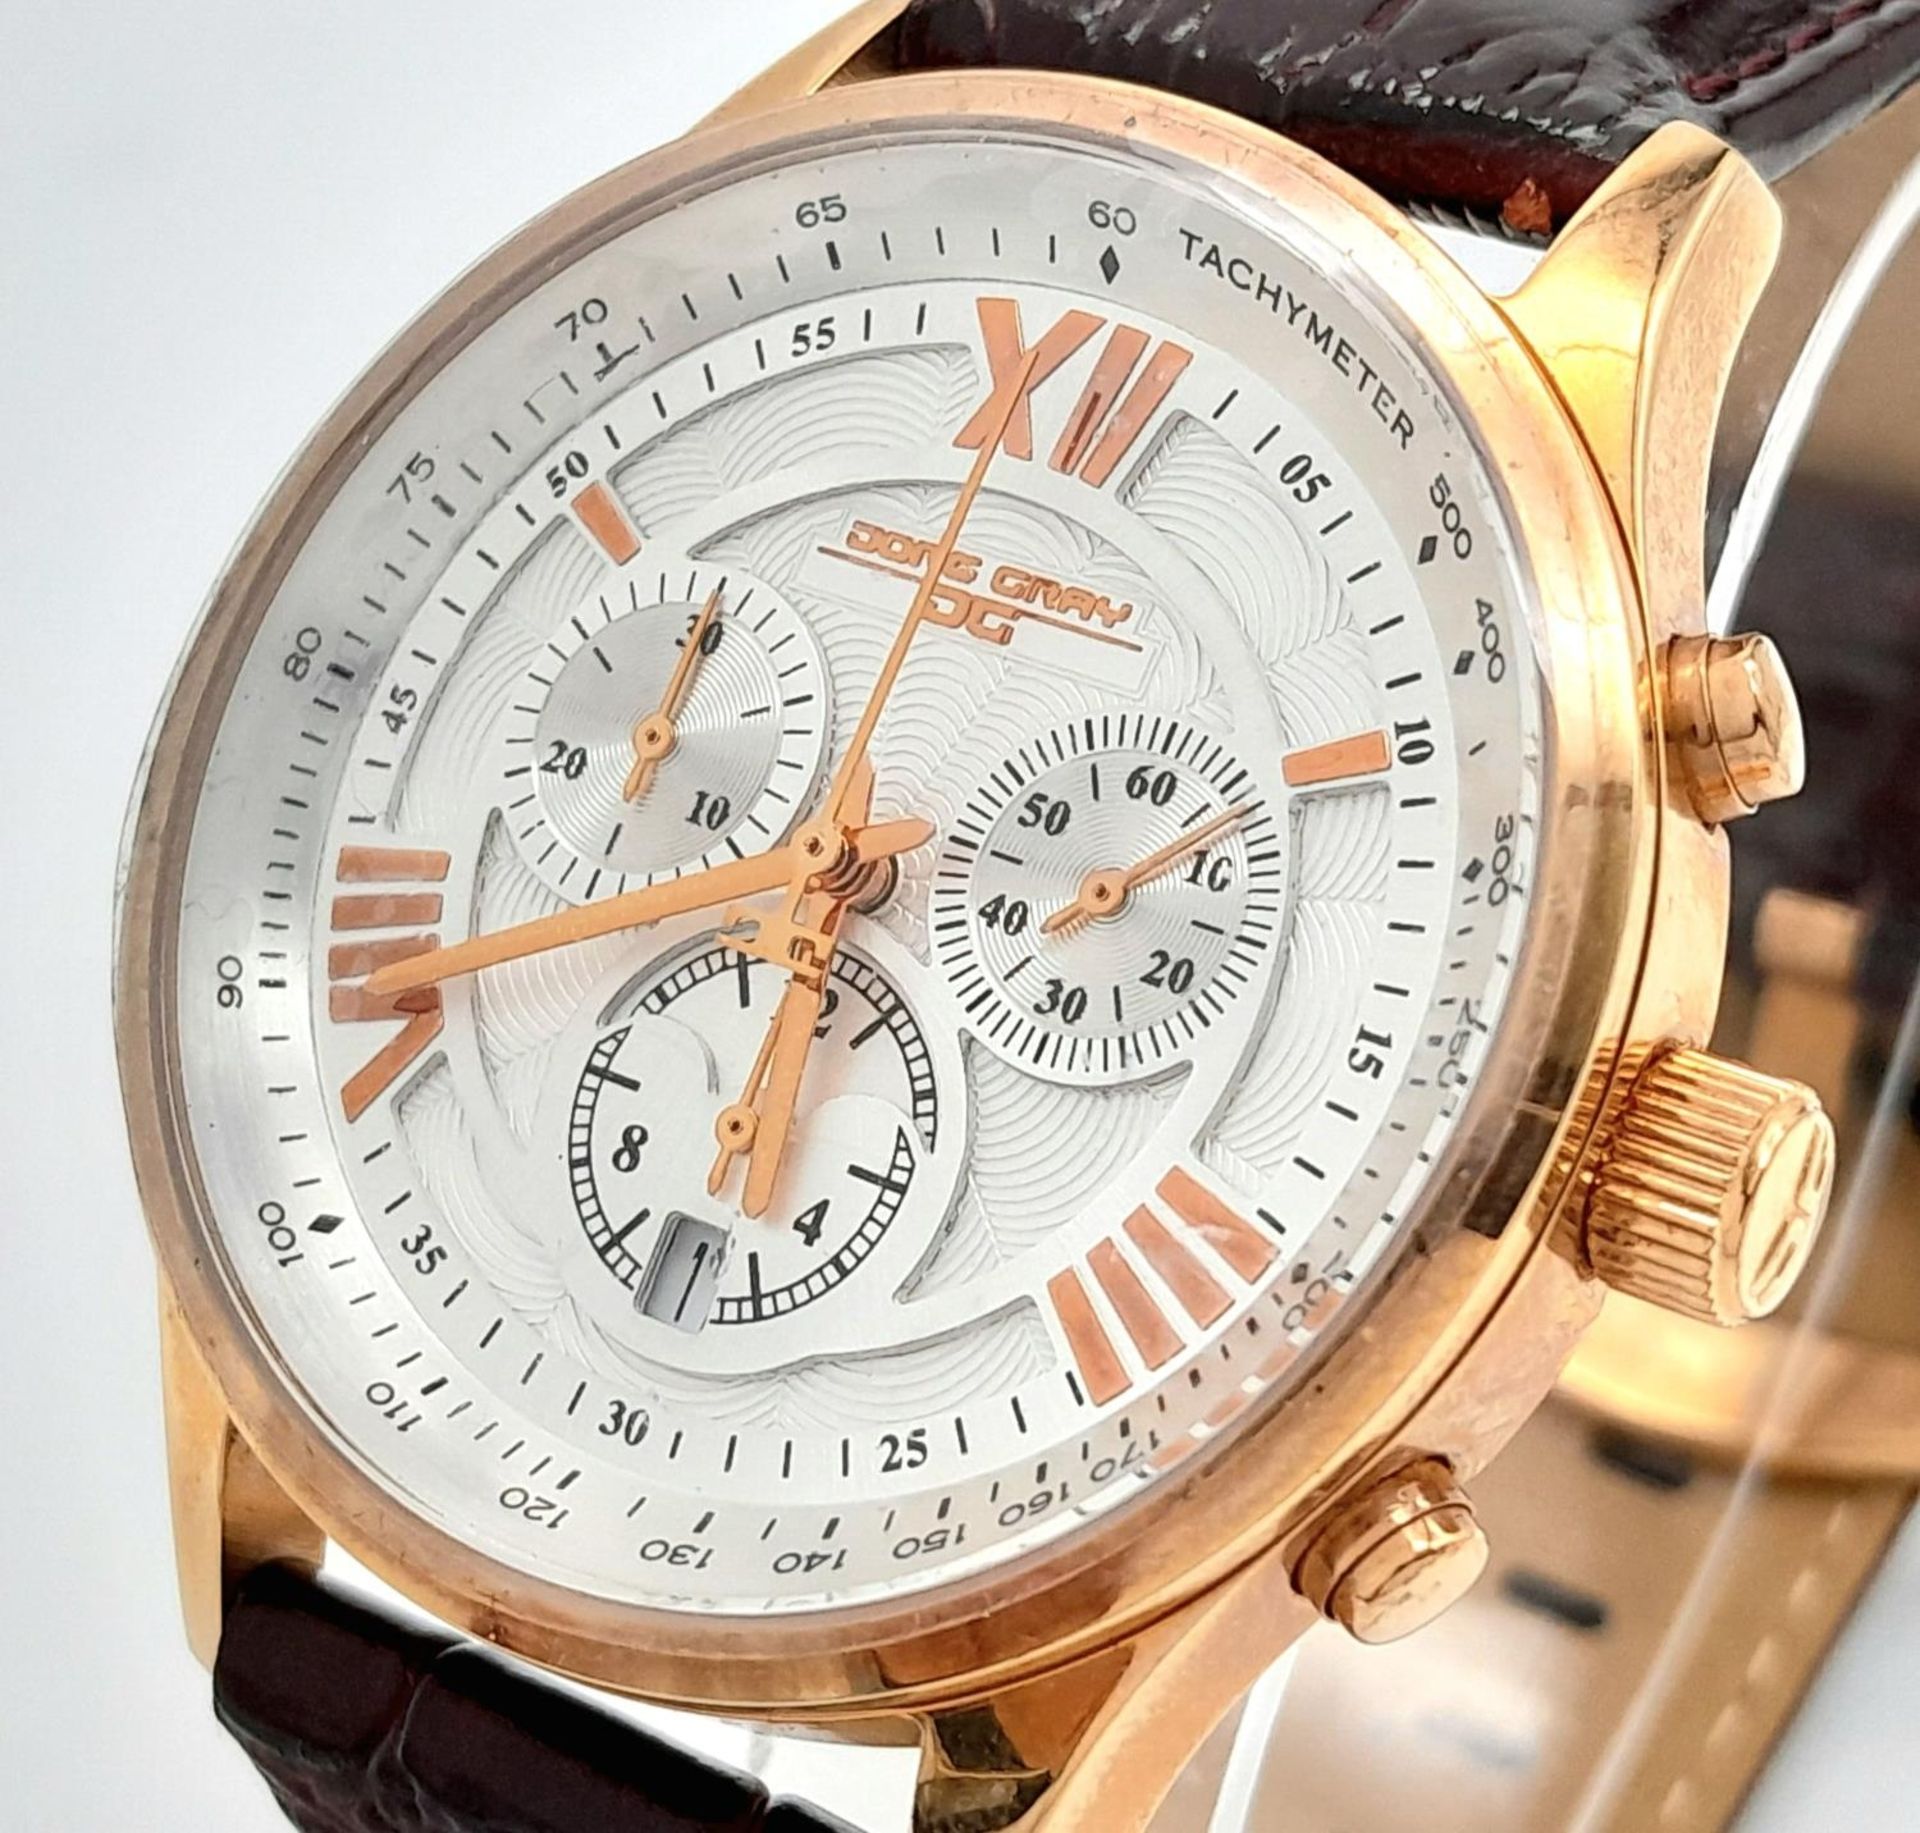 A Jorg Gray Quartz Chronograph Gents Watch. Burgundy leather strap. Gilded case - 42mm. White dial - Image 2 of 7